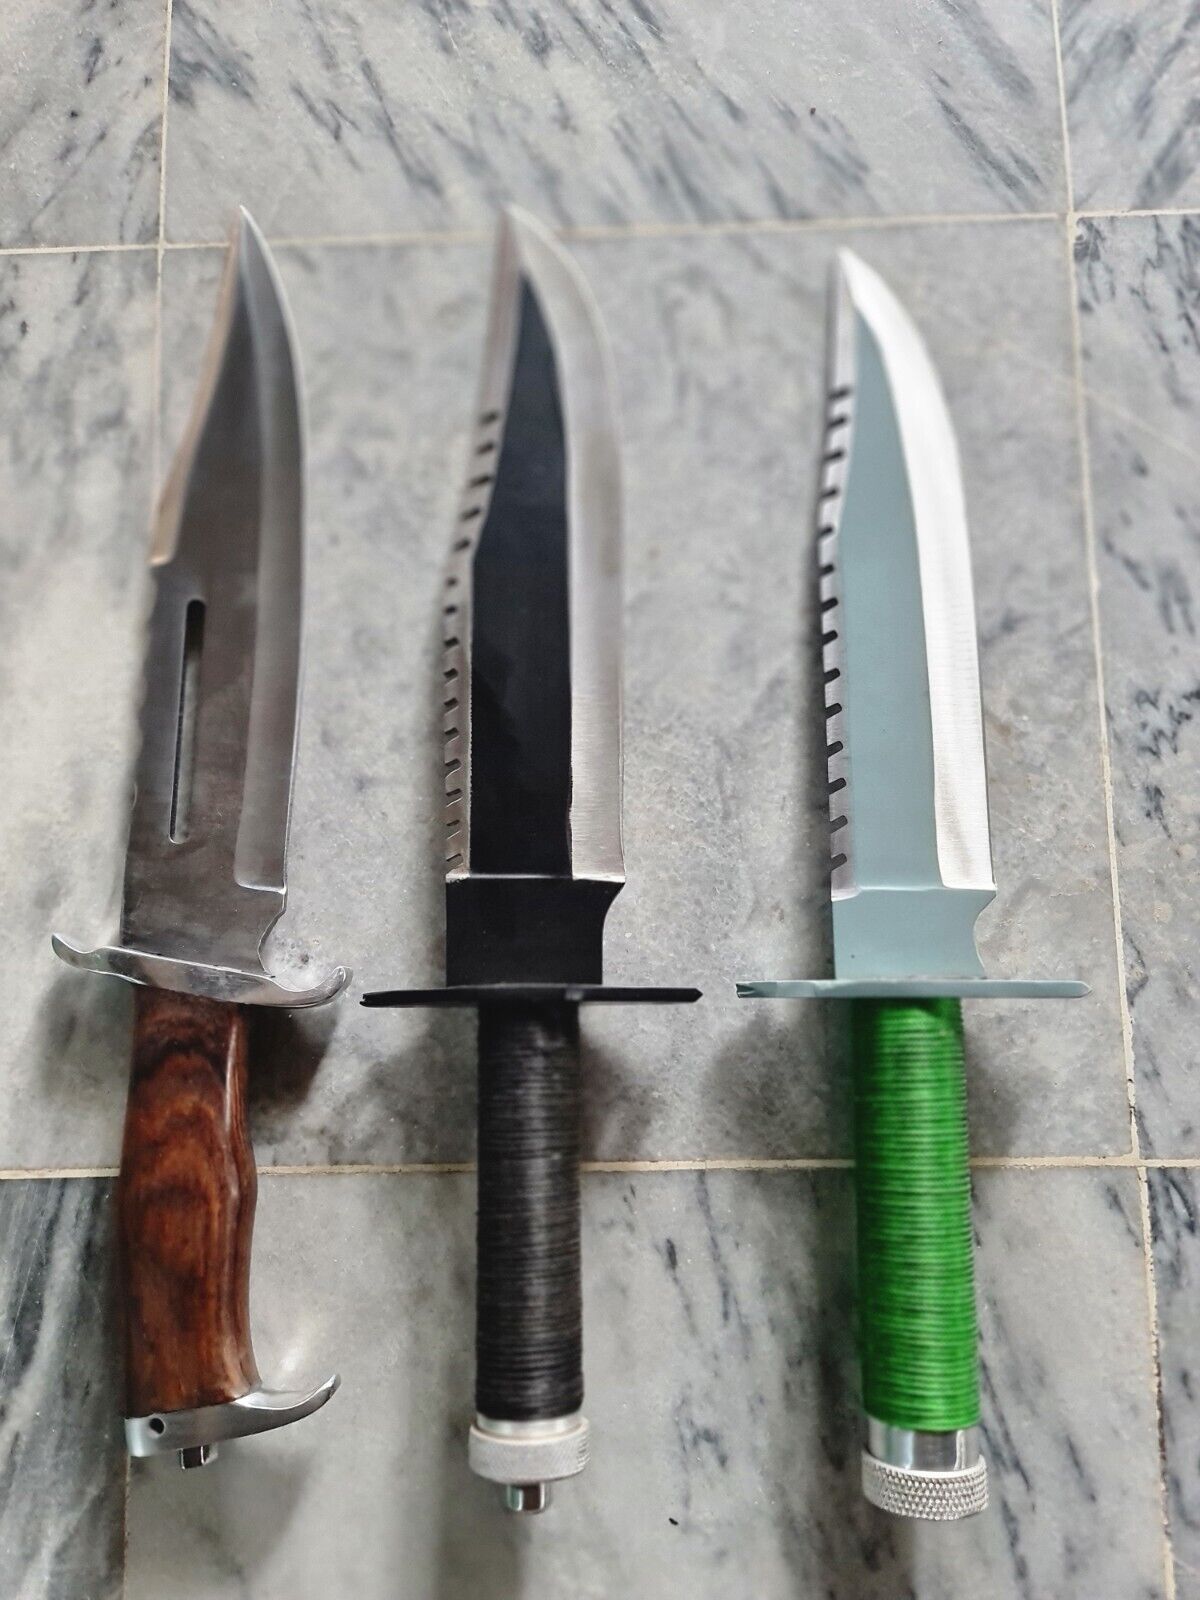 Set of Rambo First blood knife trilogy w/ sheath Army tactical Bowie knife